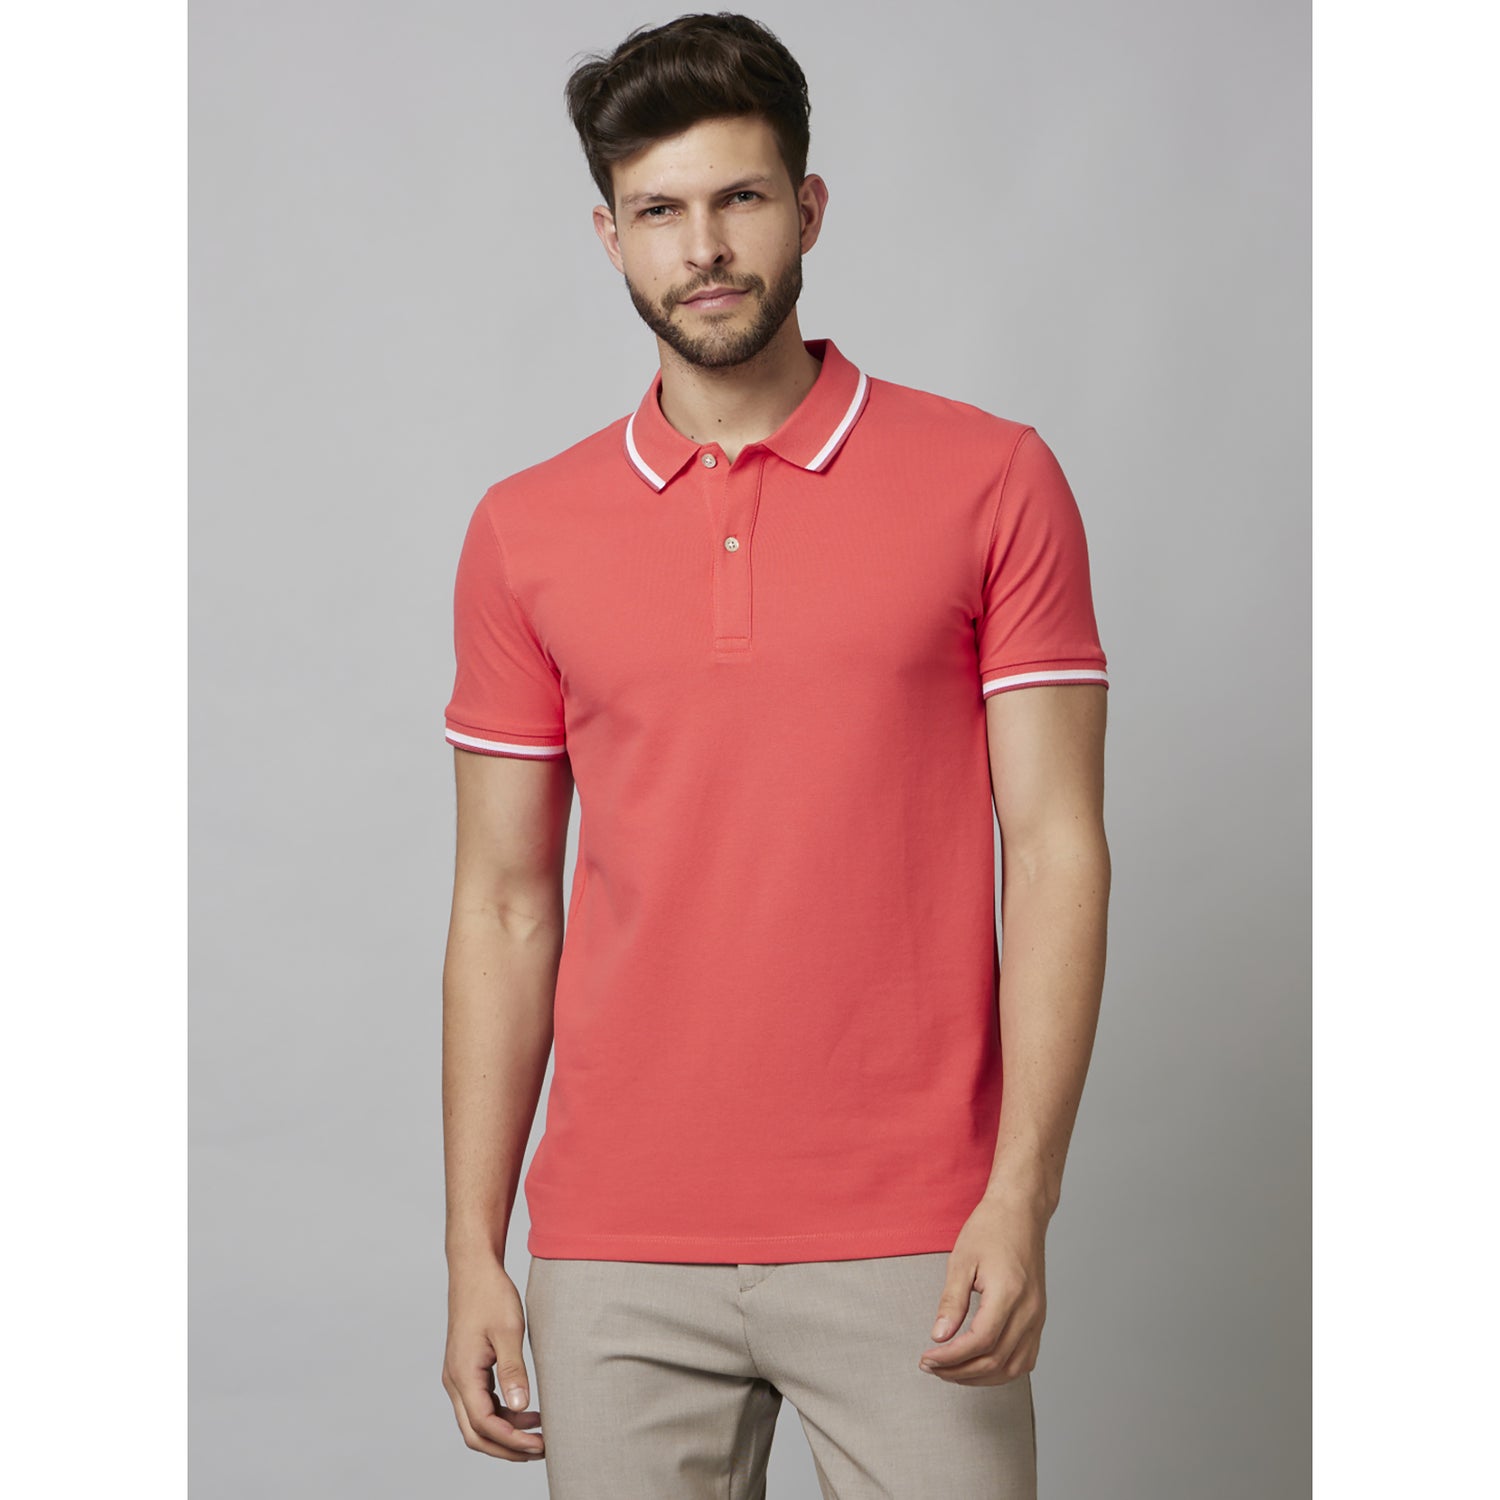 Coral Solid Short Sleeve Cotton Blend T-Shirts (DECOLRAYEB2)